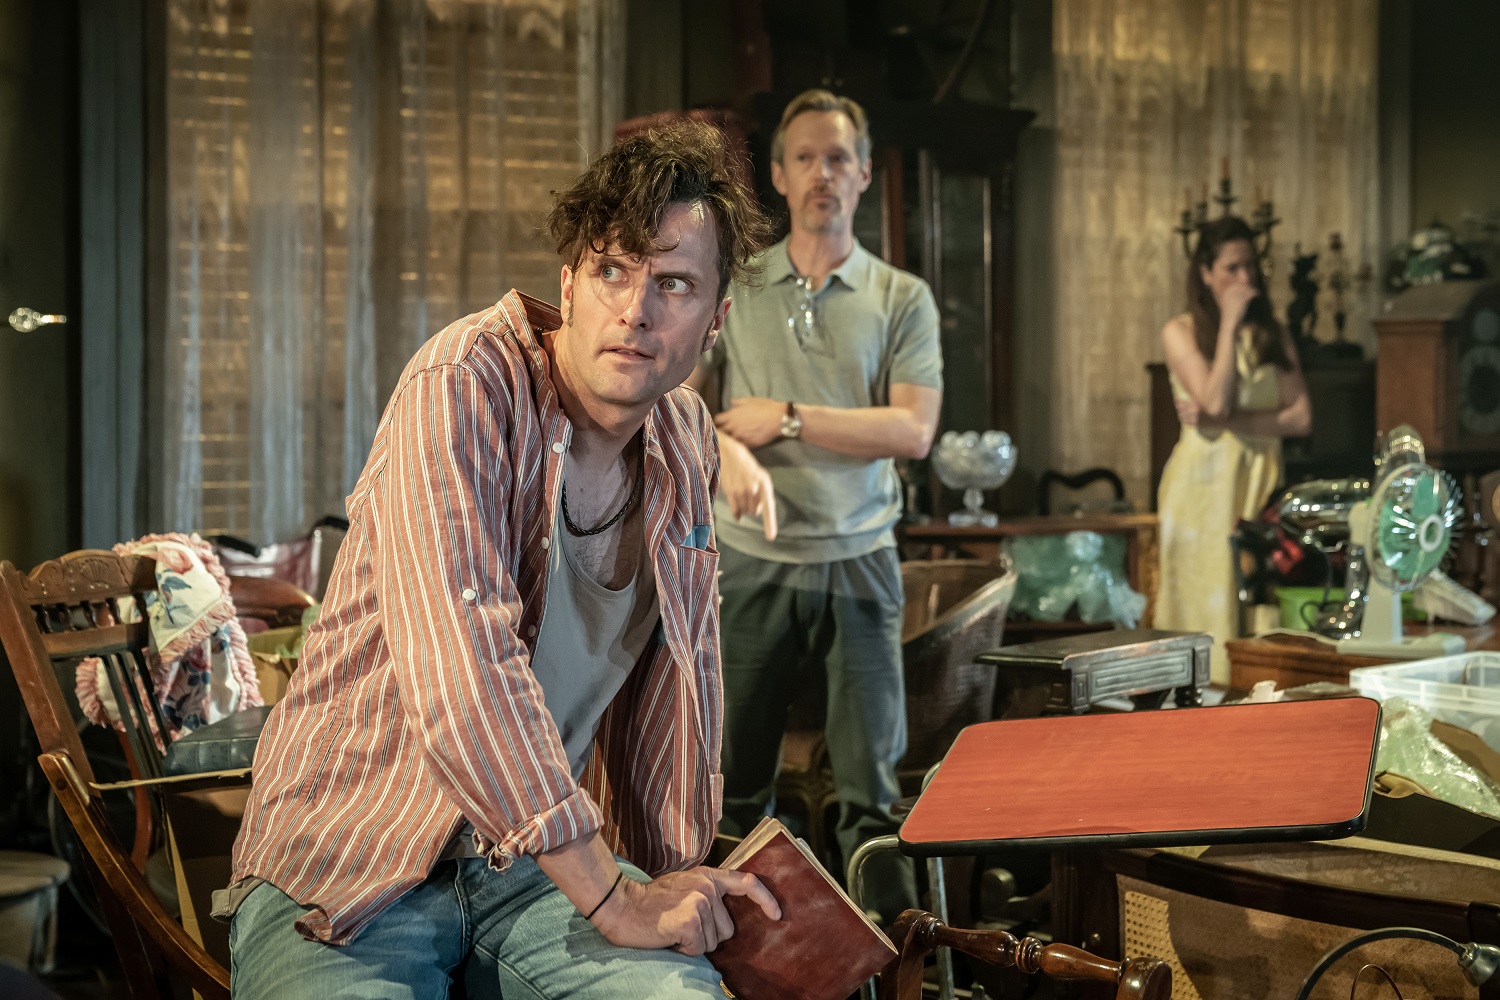 Edward Hogg (Franz) and Steven Mackintosh (Bo) in Appropriate at the Donmar Warehouse